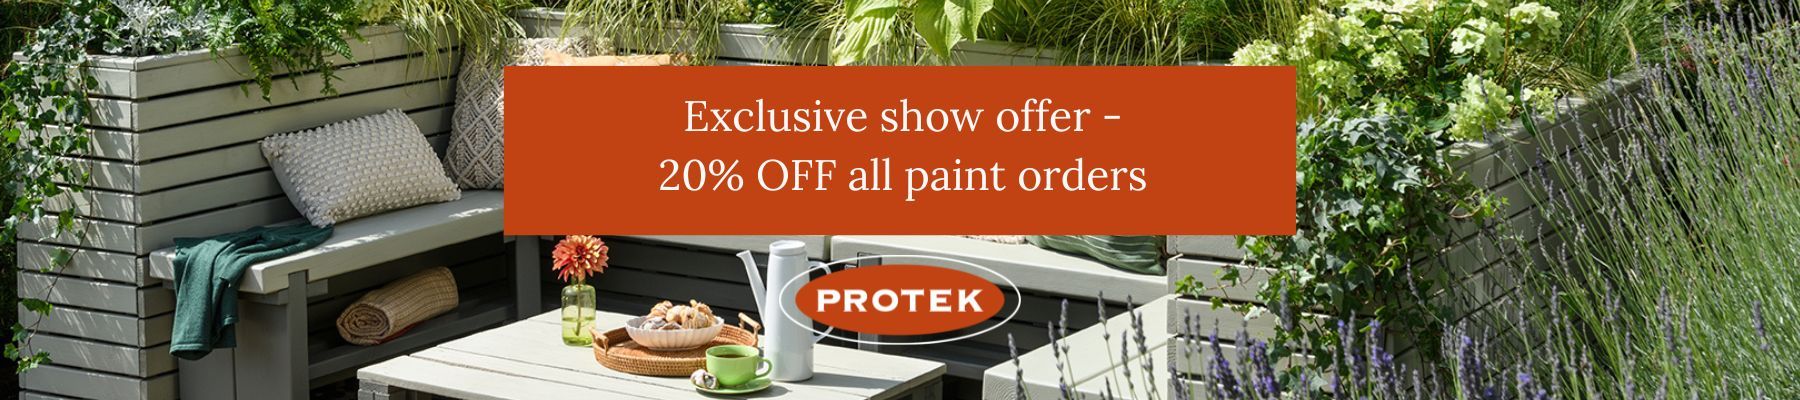 20% off all paint orders placed at the show with Protek Wood Stain